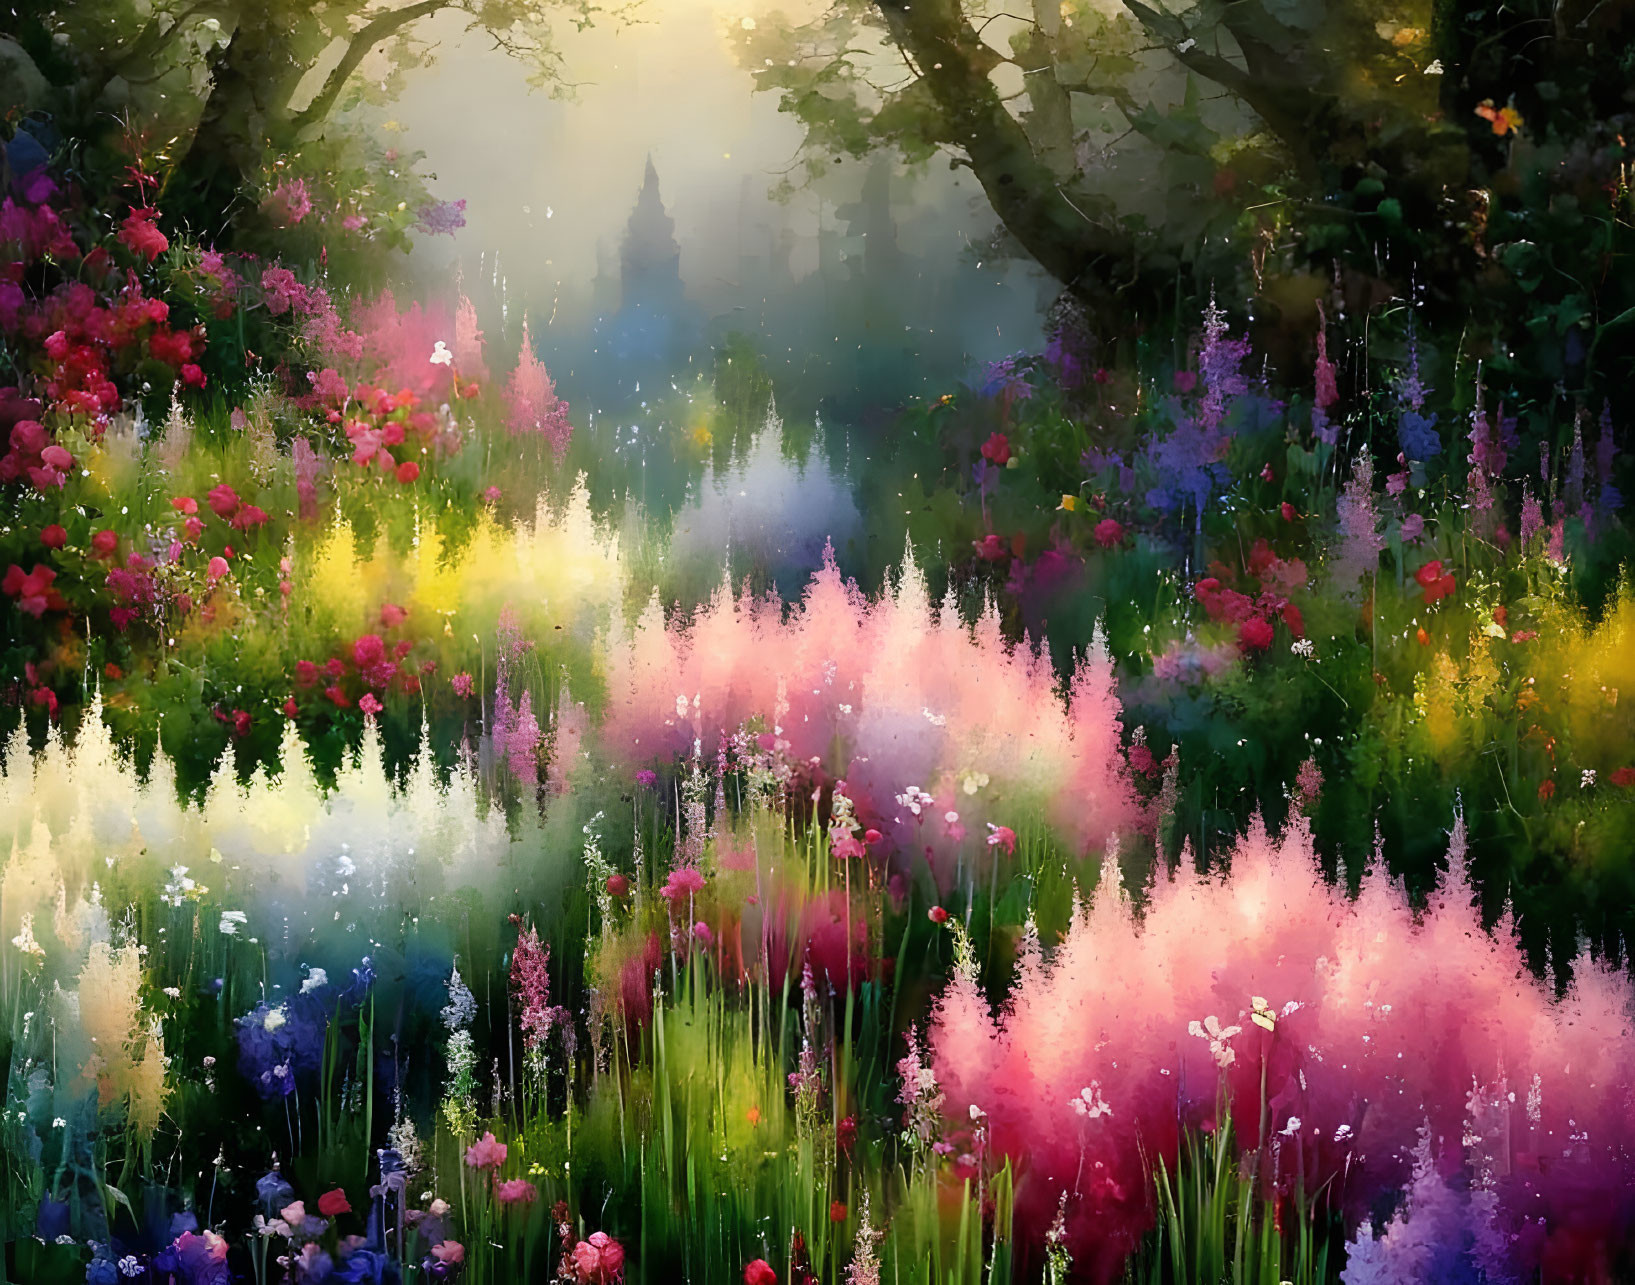 Vibrant impressionistic painting of a colorful flower garden